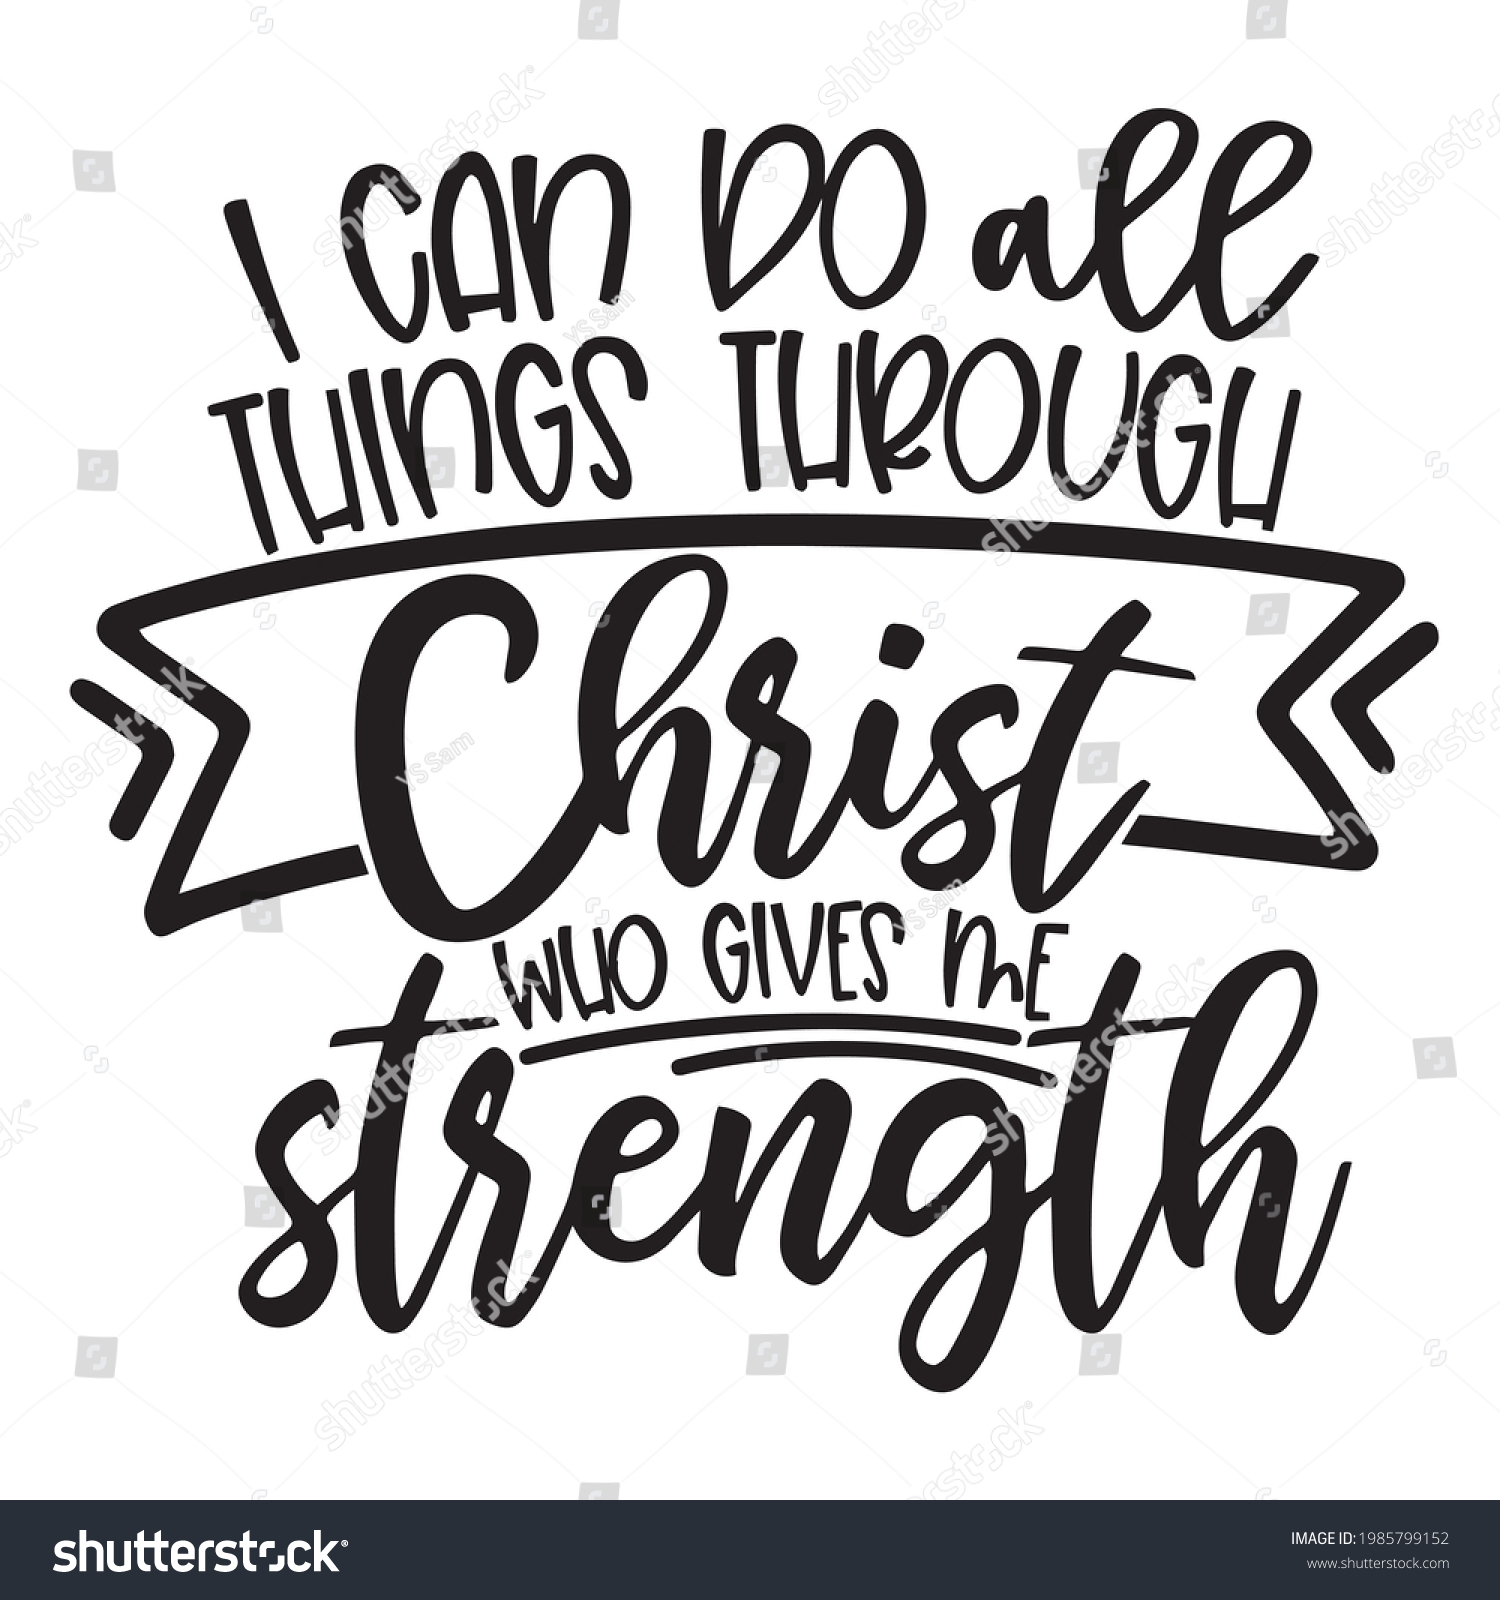 SVG of i can do all things through christ who gives me strength background inspirational positive quotes, motivational, typography, lettering design svg